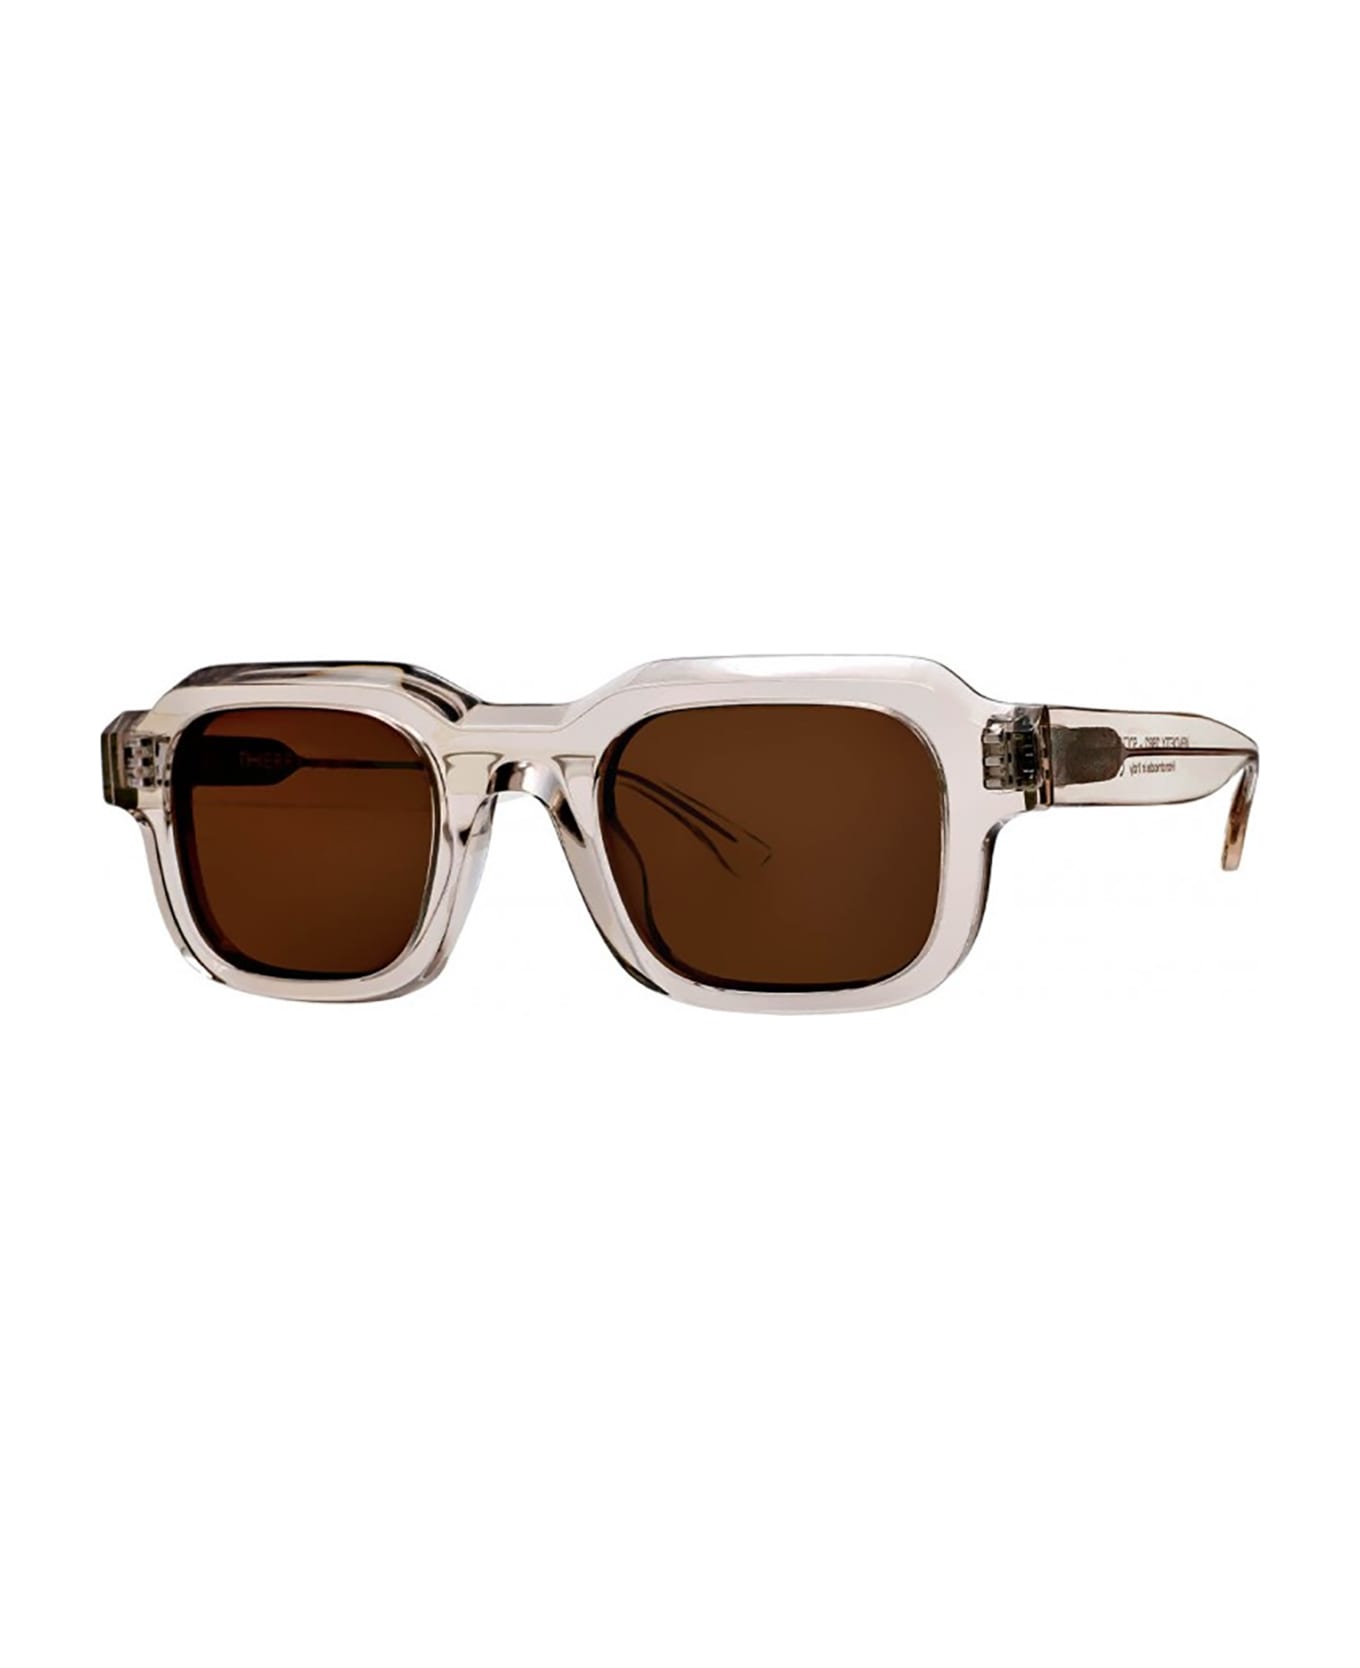 Thierry Lasry VENDETTY Sunglasses